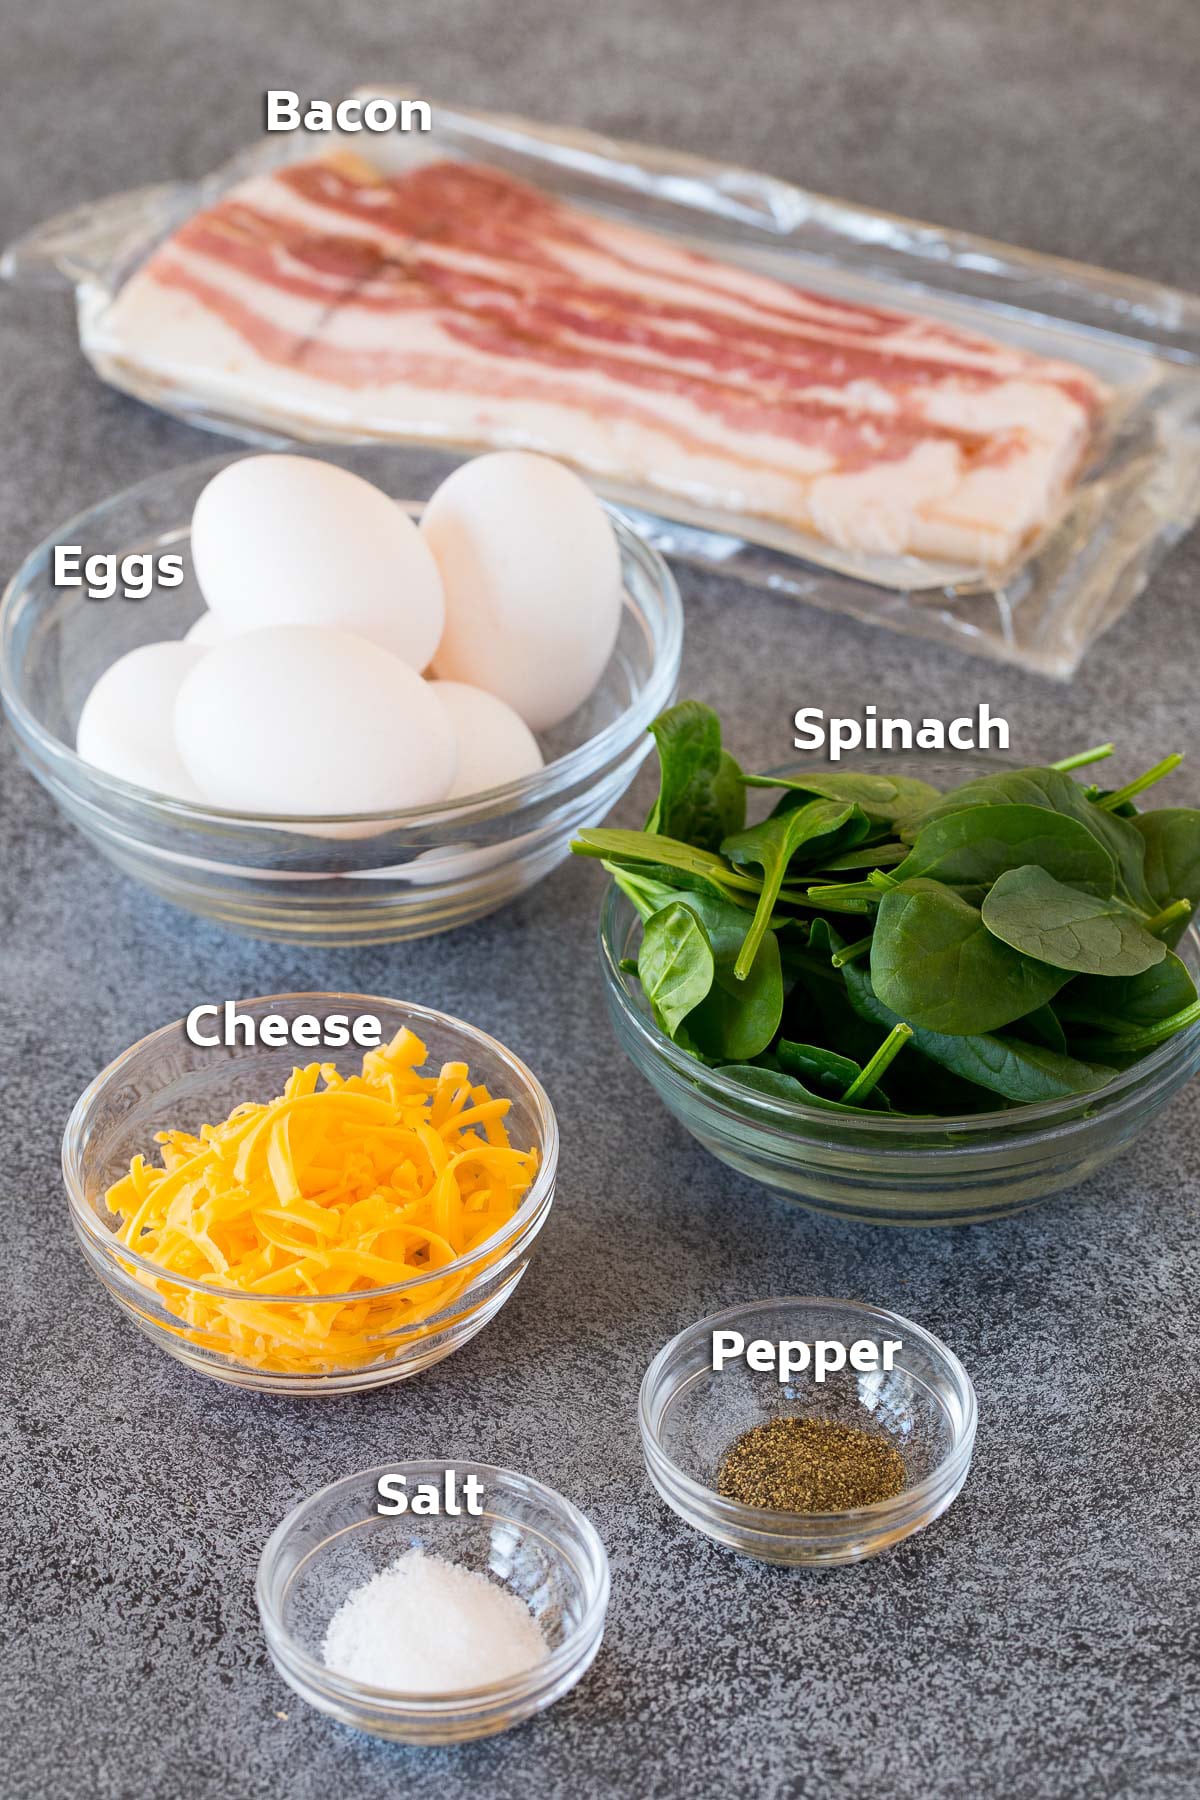 Ingredients including eggs, spinach, cheese and seasonings.